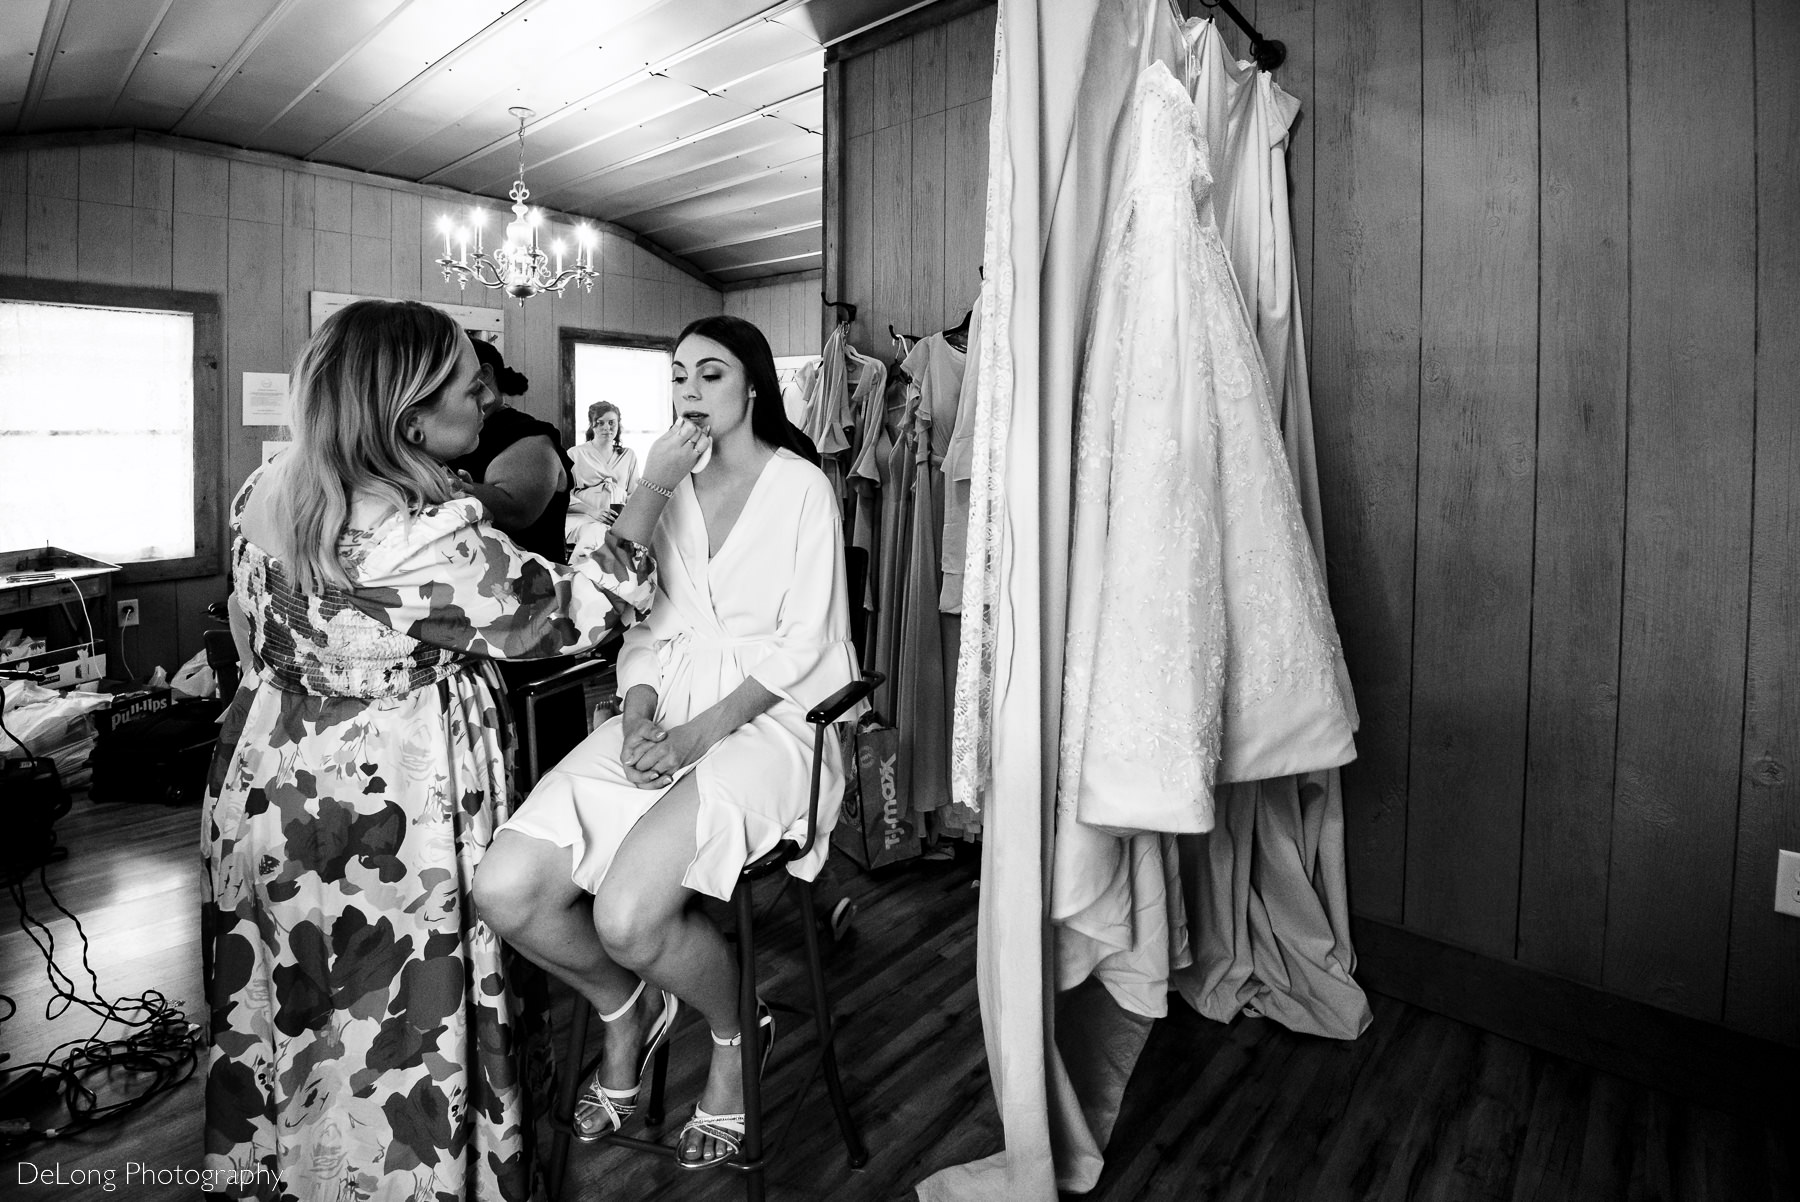 Black and white photograph of a bride getting her makeup done while simultaneously showing her wedding dress hidden behind a curtain by Charlotte Wedding Photographers DeLong Photography